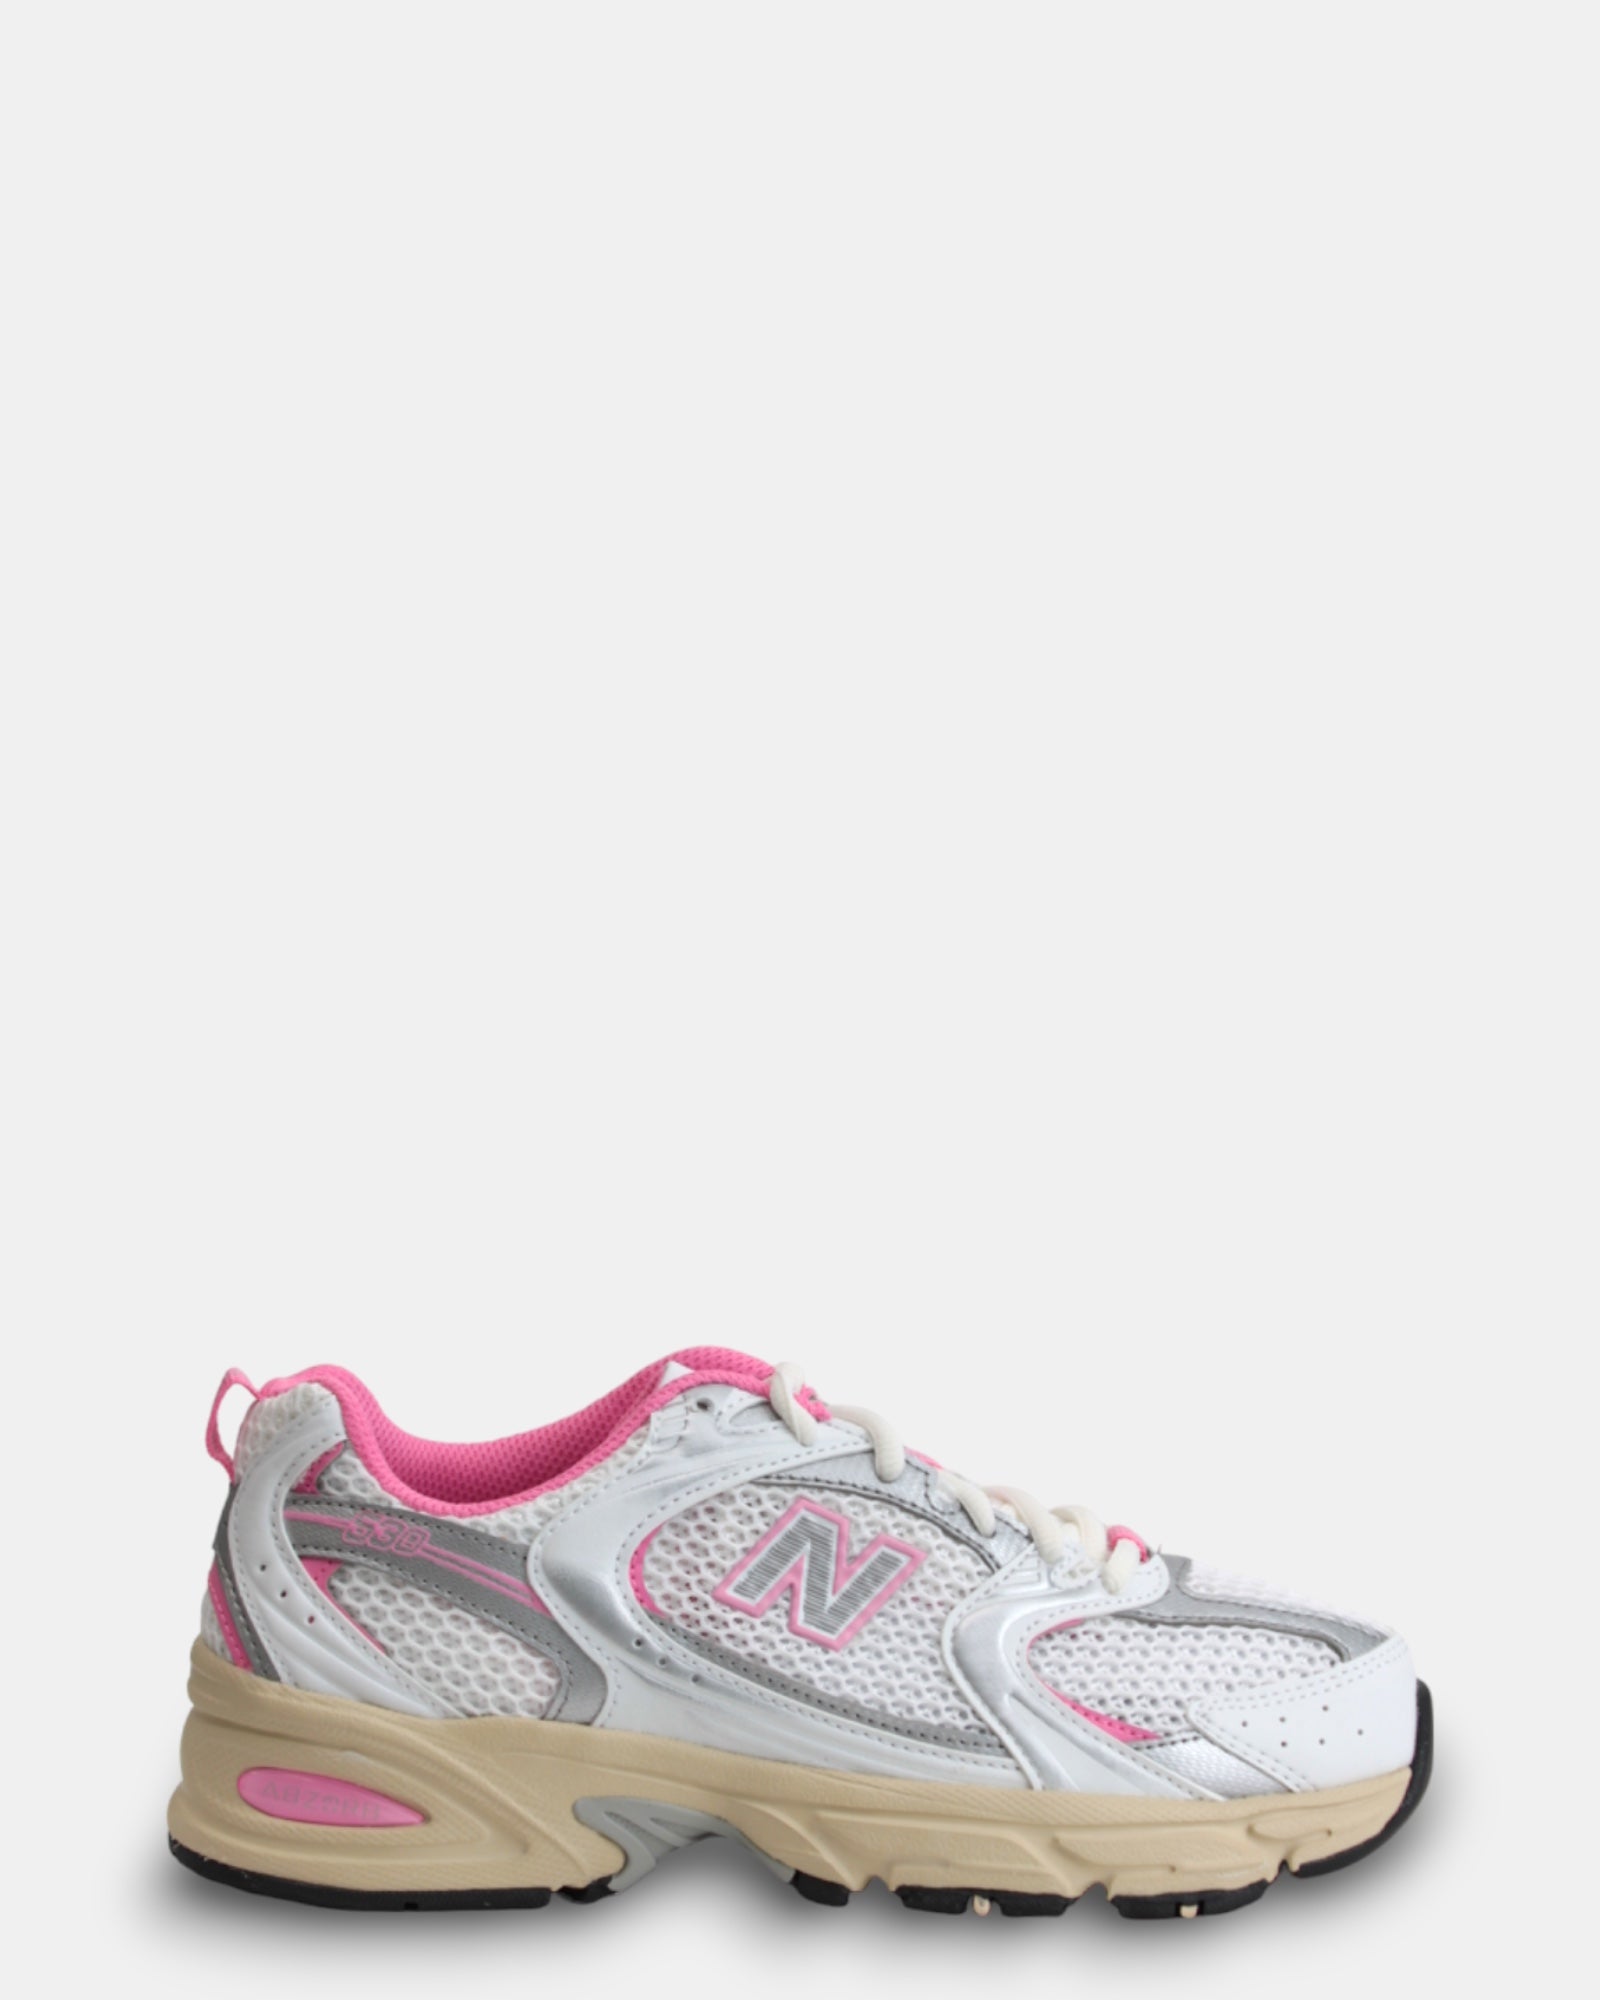 SNEAKERS White/pink New Balance